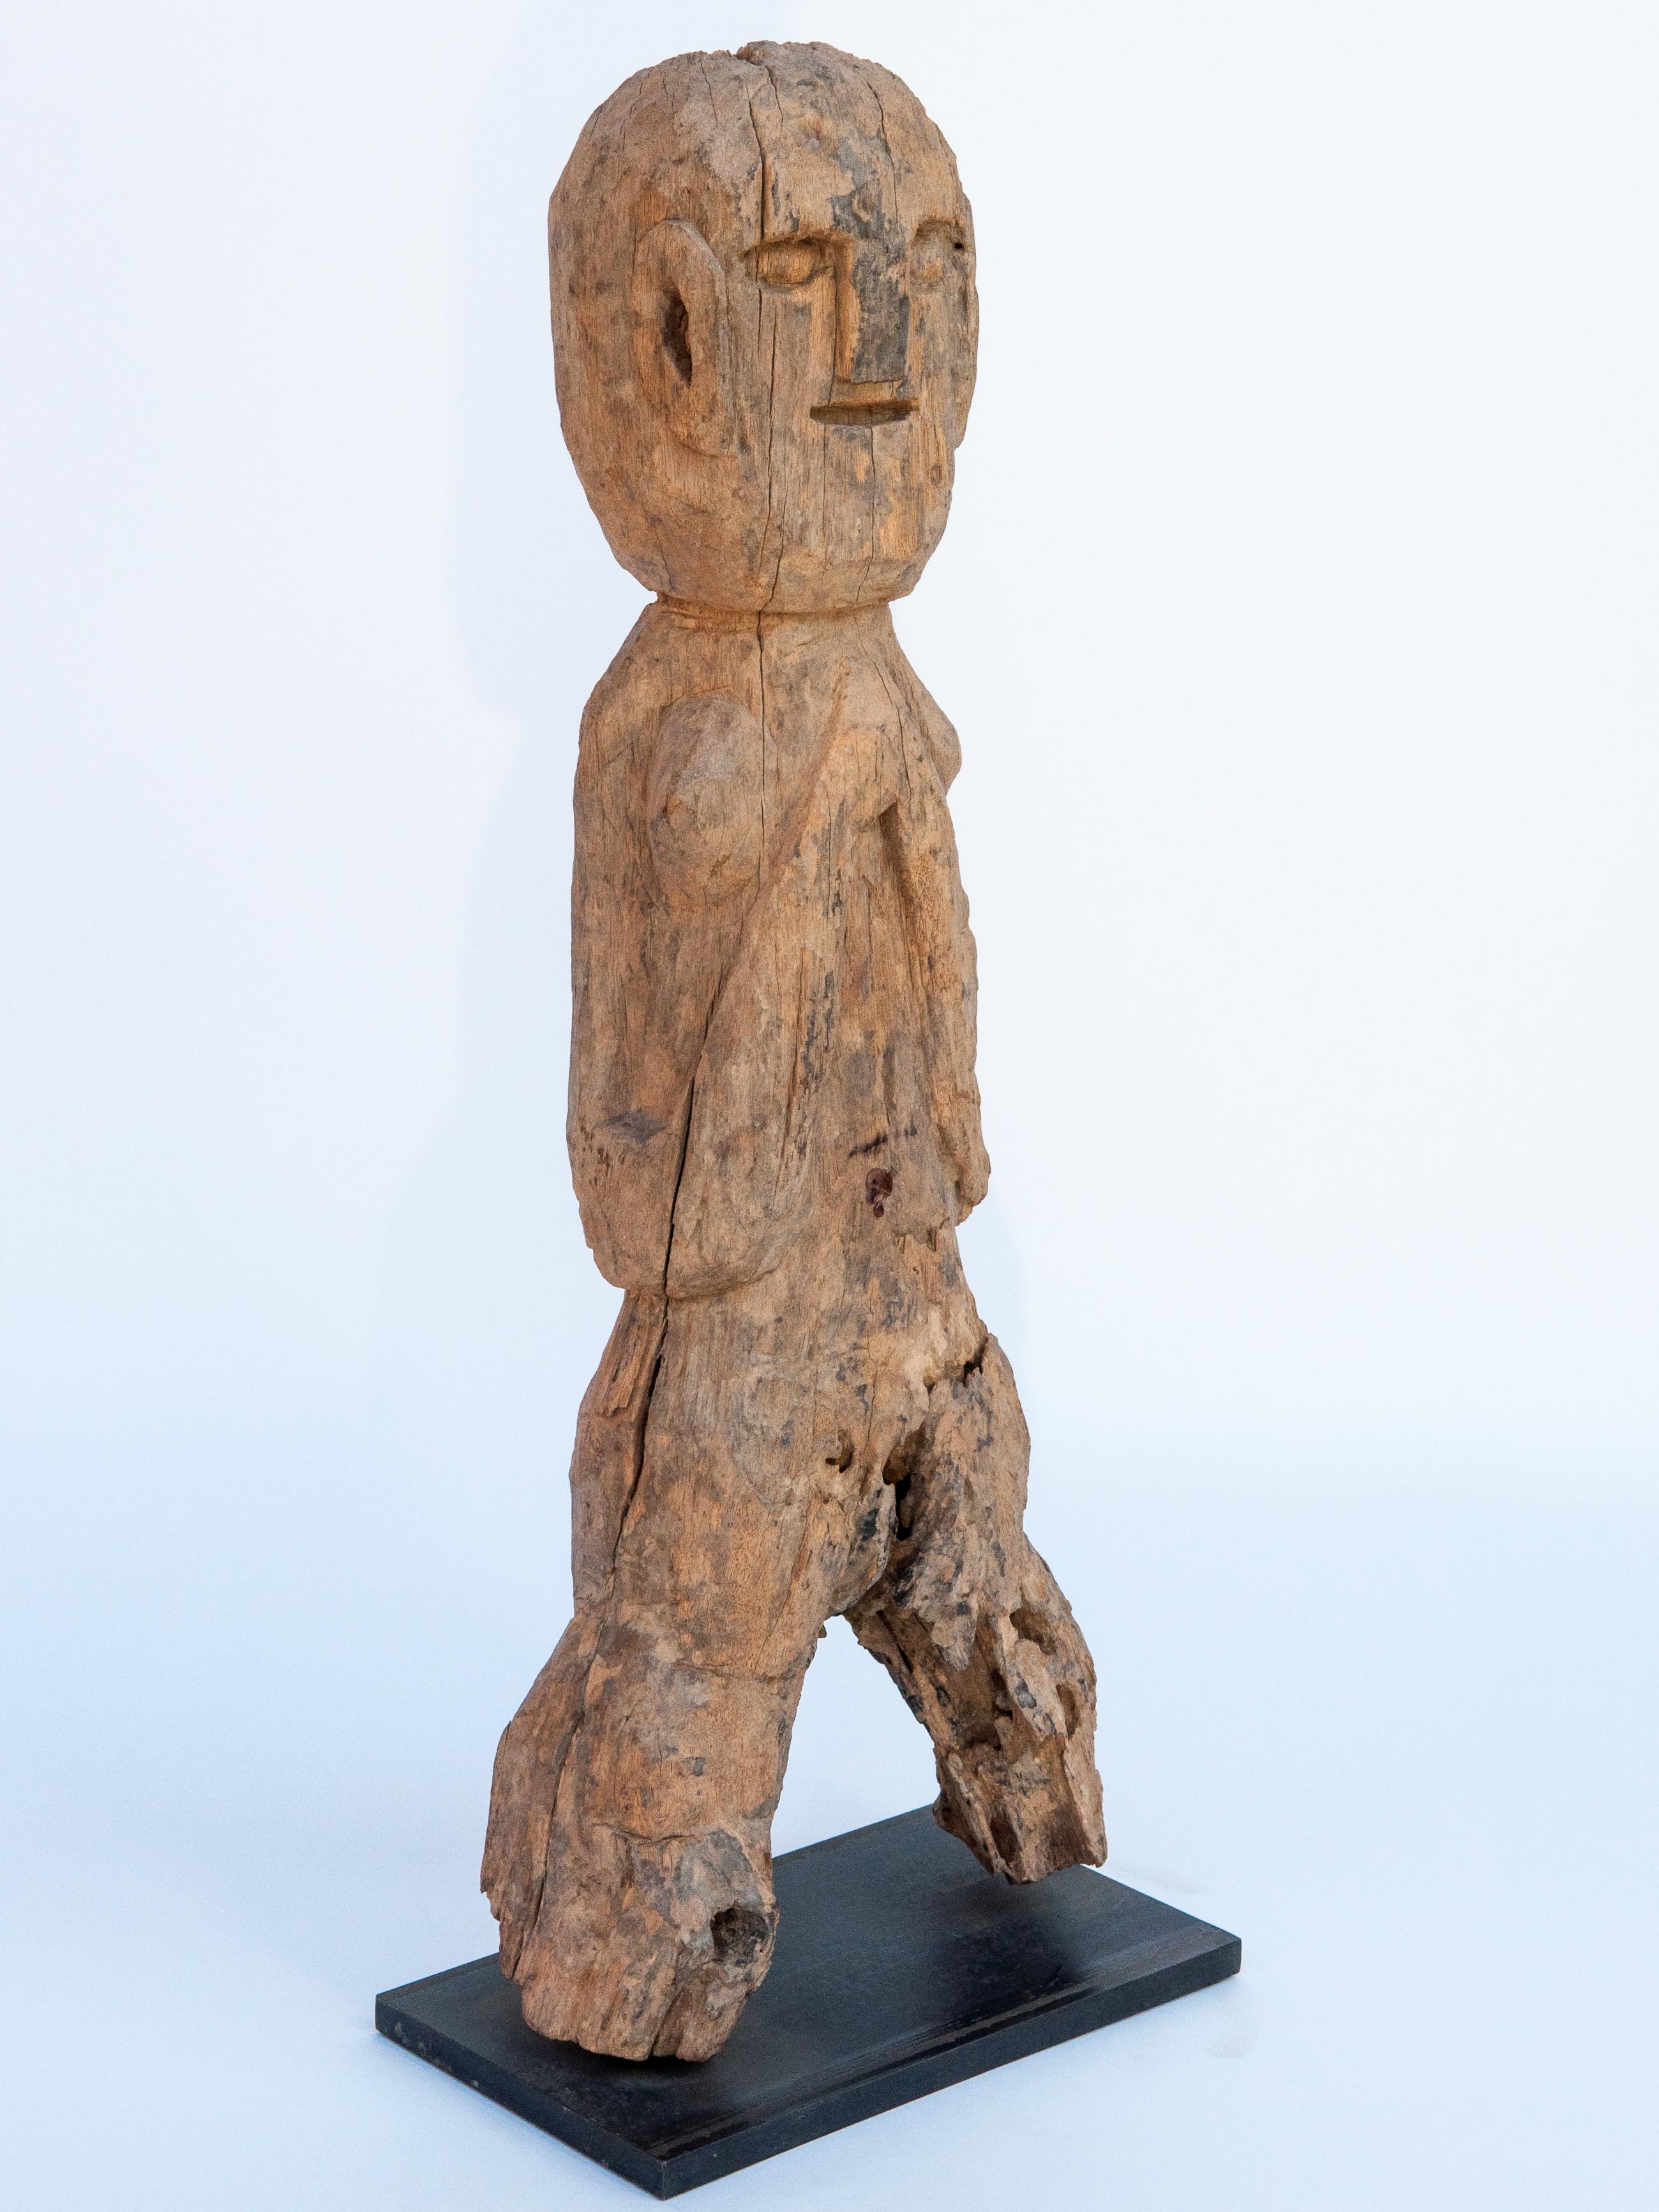 Wooden tribal female statue from West Nepal, early to mid-20th century. Mounted on a metal plate.
This wooden figure comes from West Nepal, most probably from the area of the Karnali river system. There is some mystery to these sculptures, which are